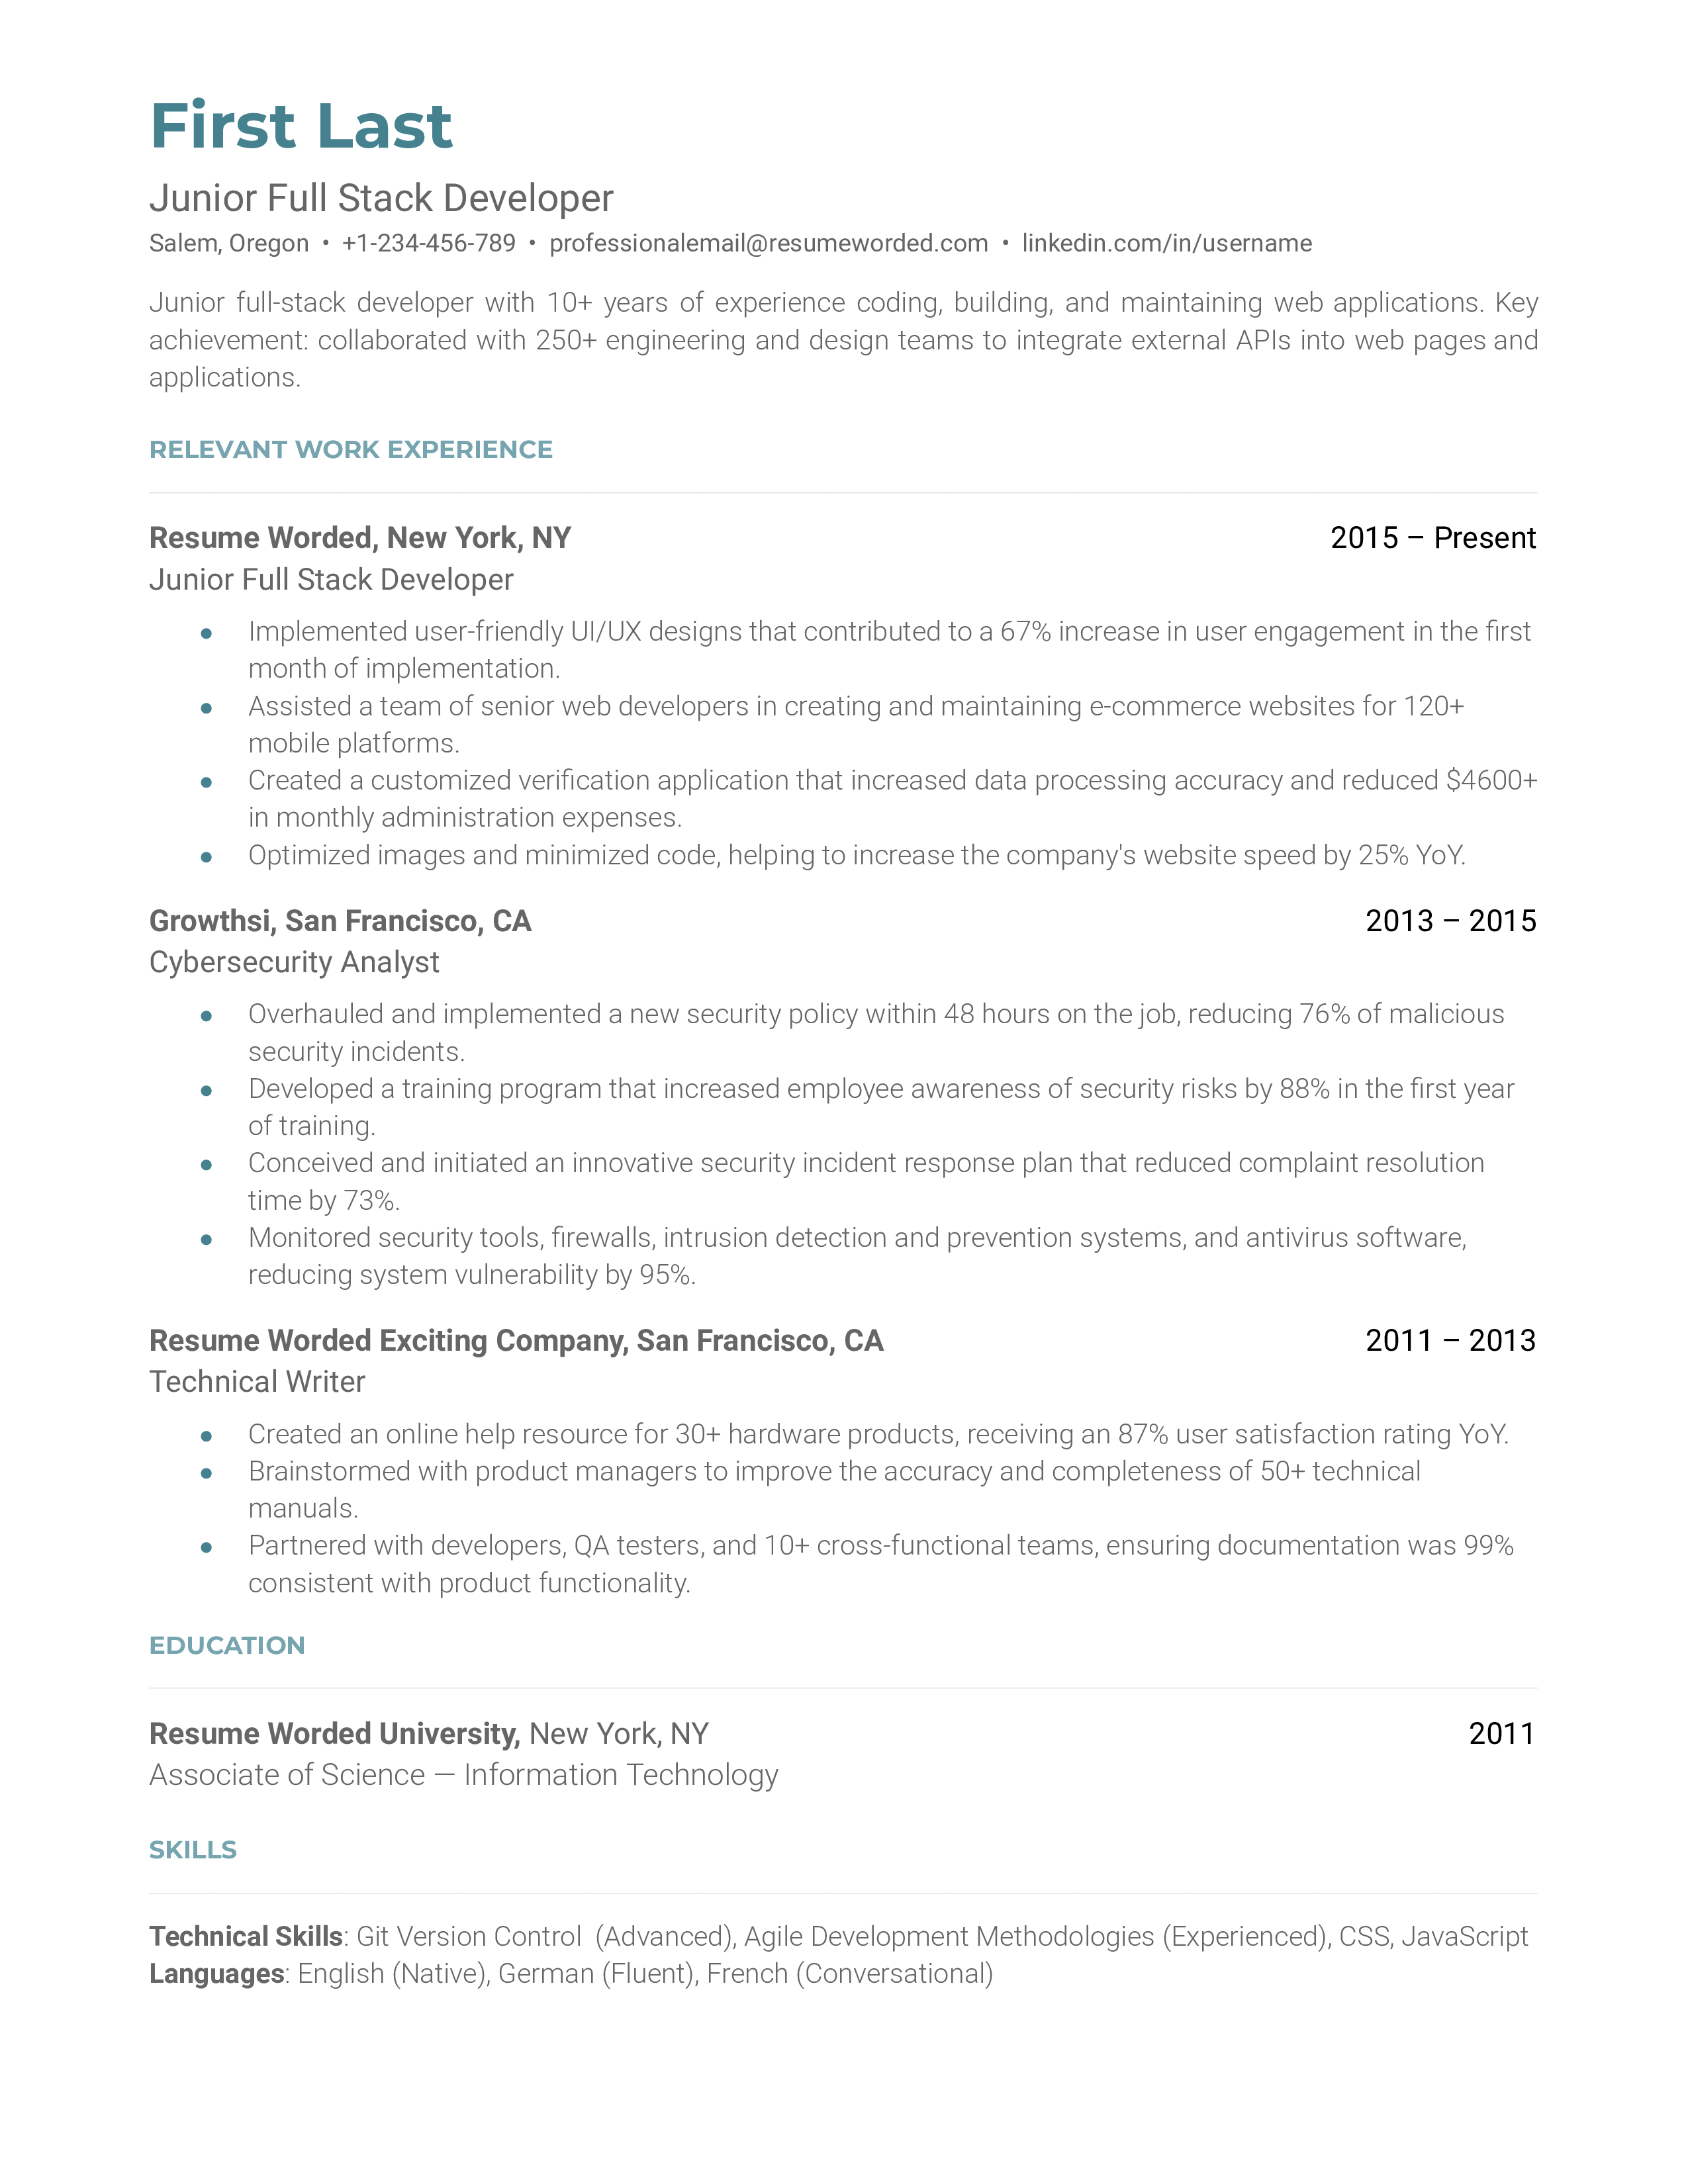 Junior Full Stack Developer resume showcasing project experience and diverse programming skills.